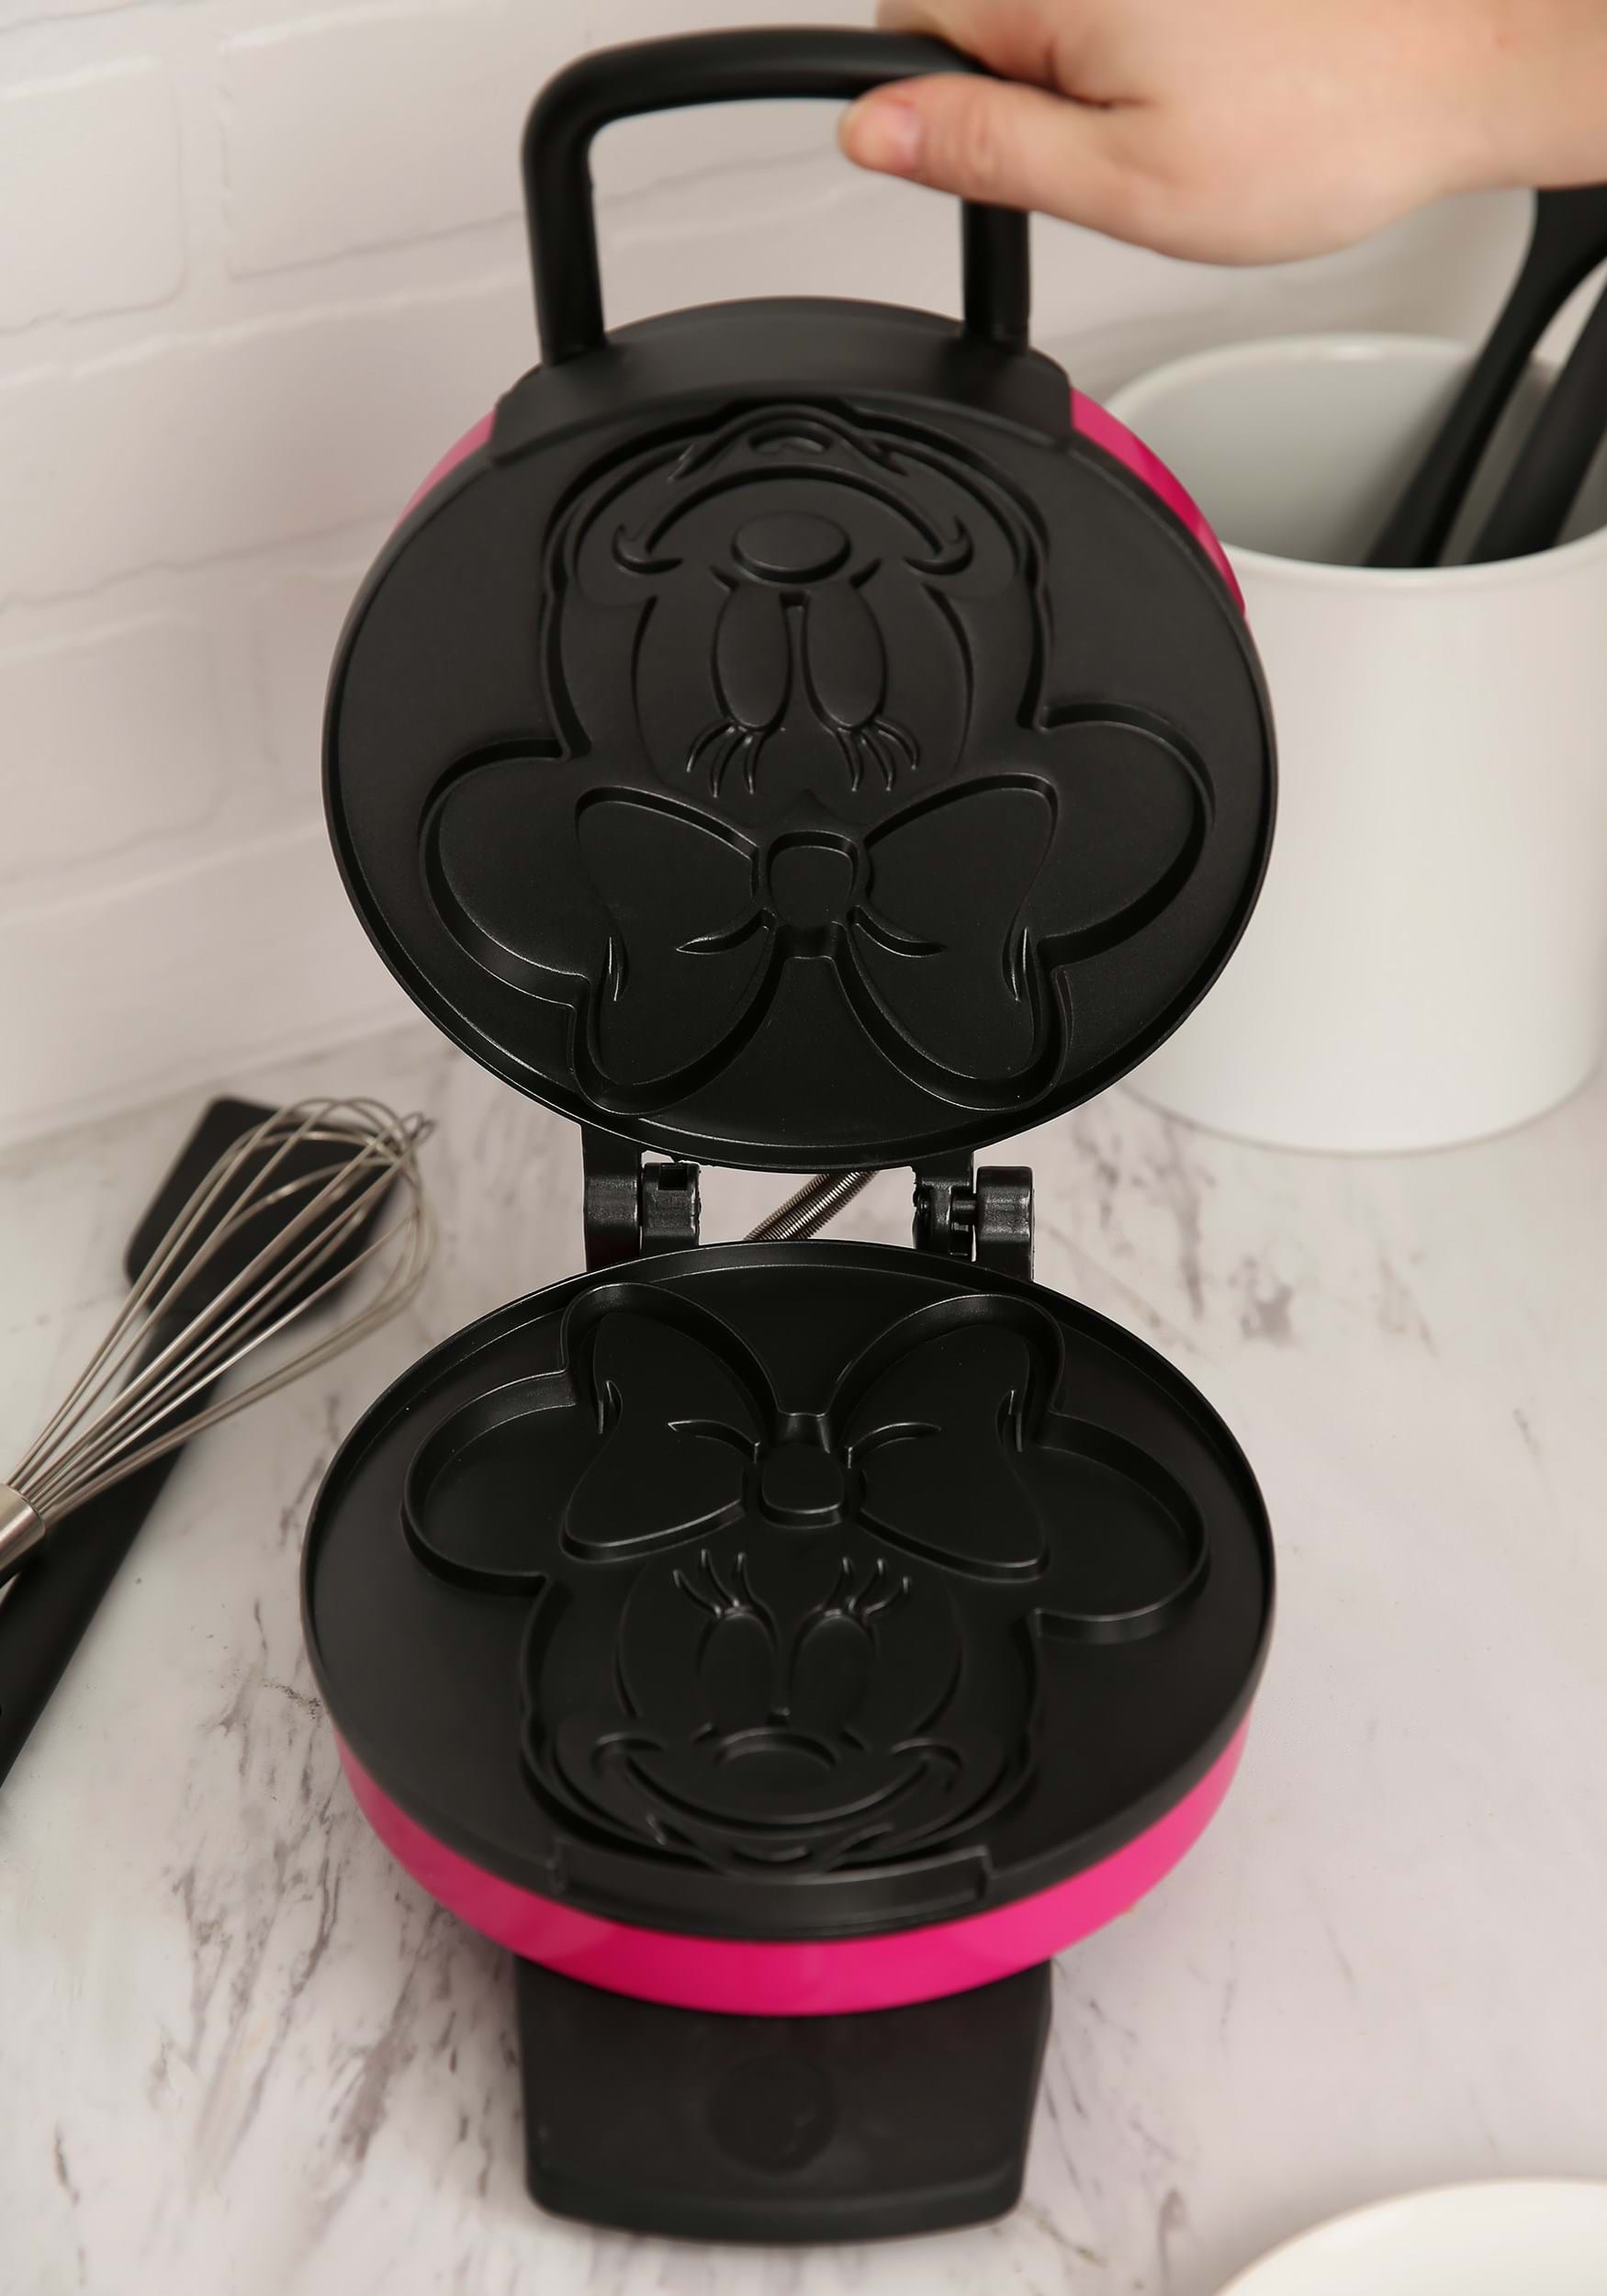 https://images.fun.com/products/44636/2-1-165768/minnie-mouse-face-disney-waffle-maker-alt-1.jpg